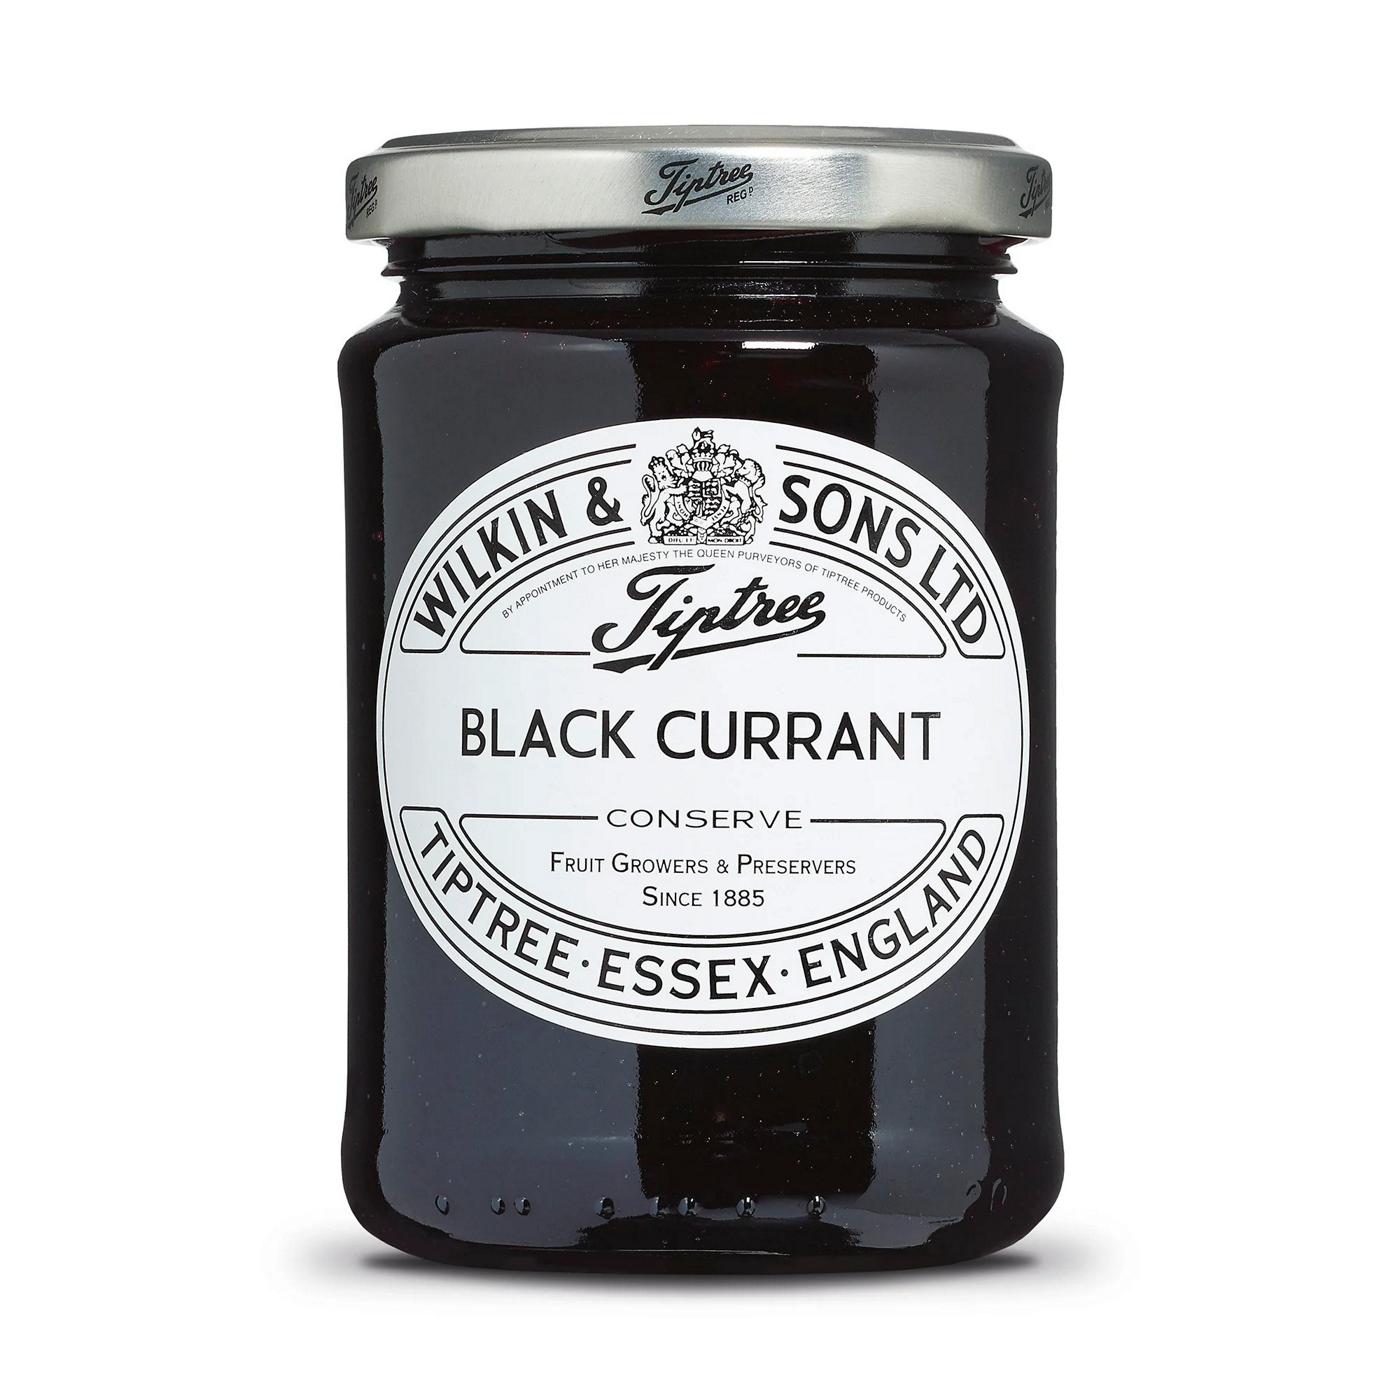 Tiptree Black Currant Conserve; image 1 of 2